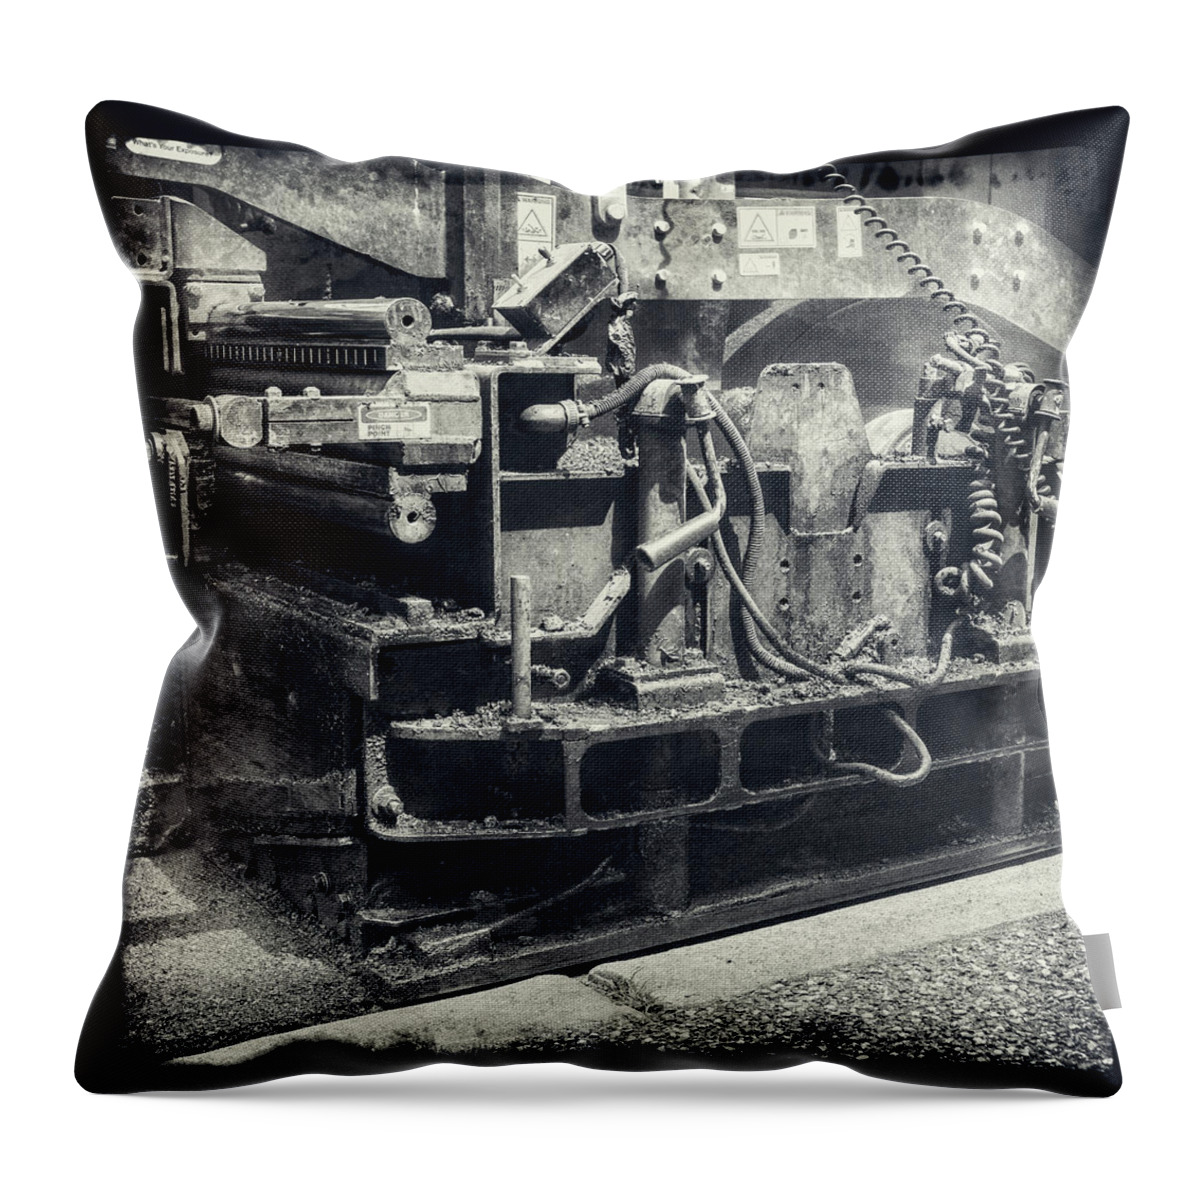 Street Paver Throw Pillow featuring the photograph Street Paver by Tony Locke